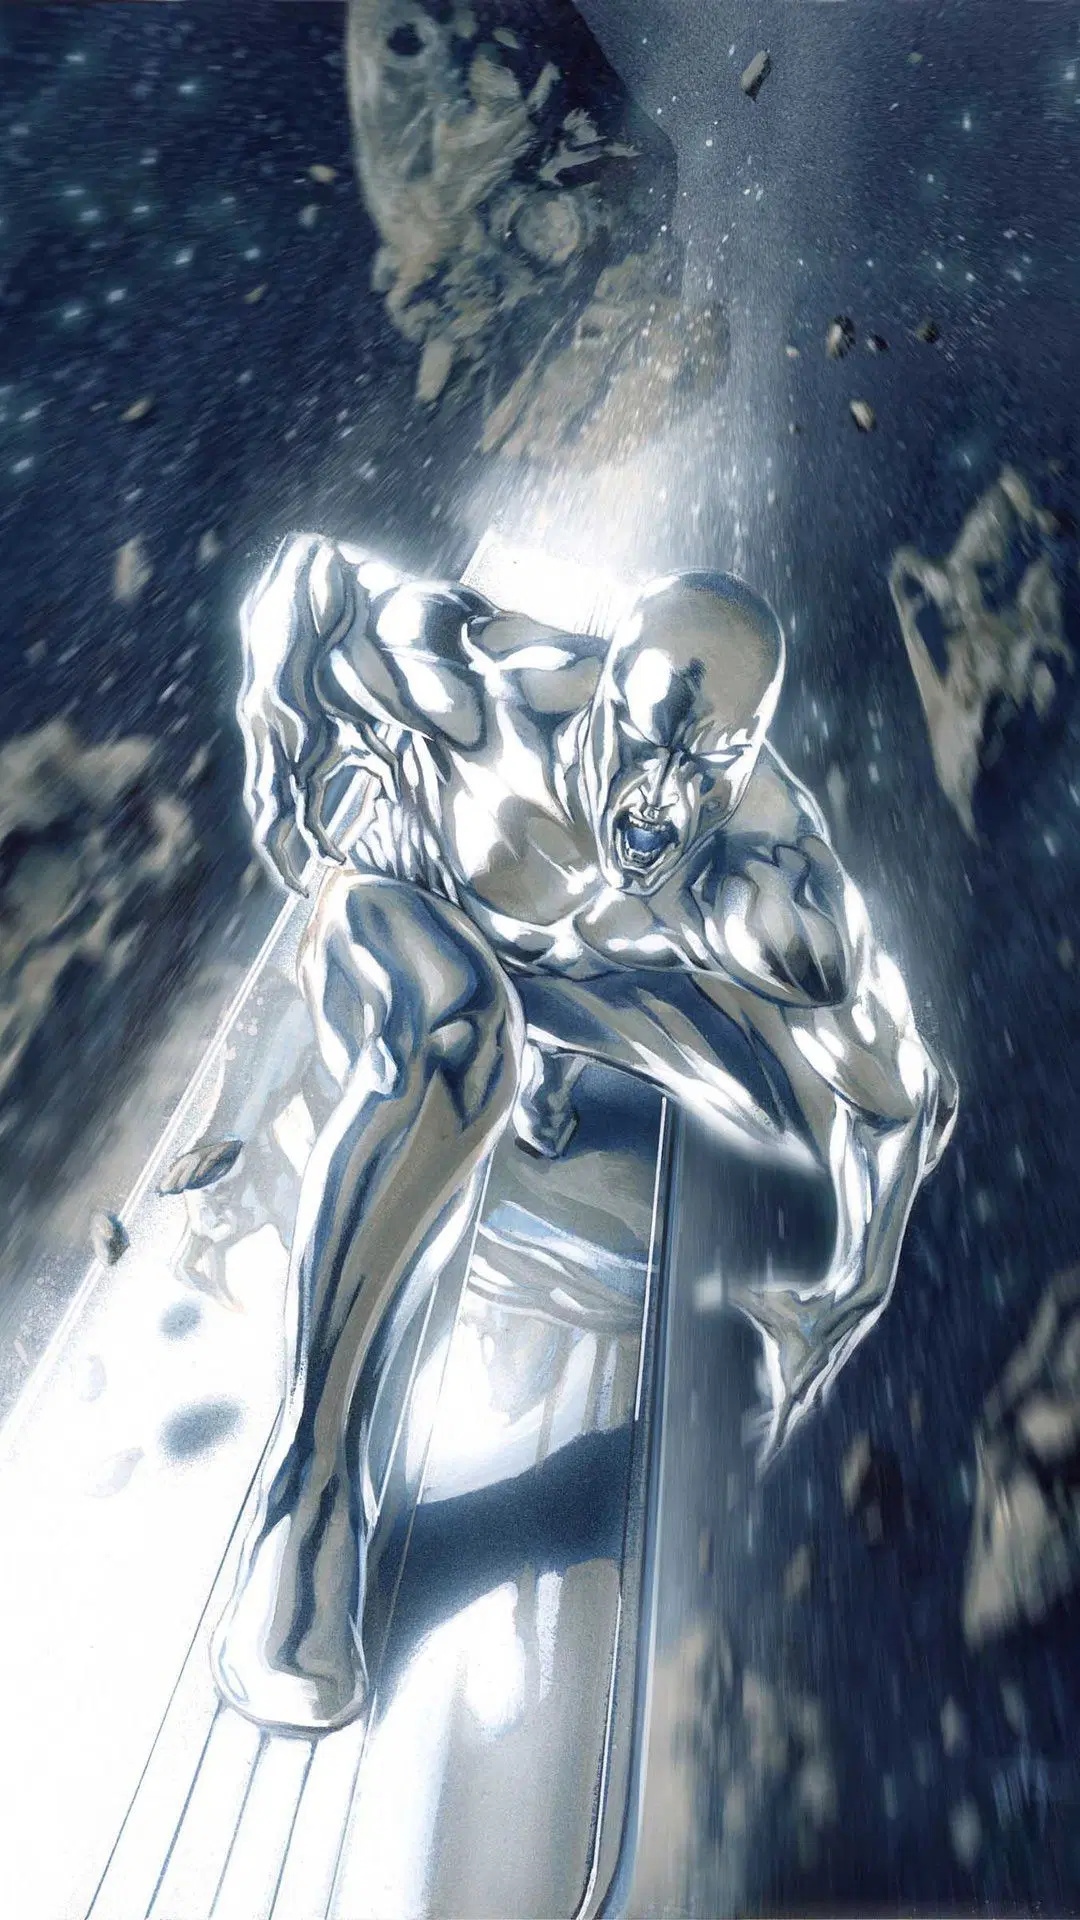 Silver Surfer wallpaper, Android iPhone desktop backgrounds, 1080x1920 Full HD Phone